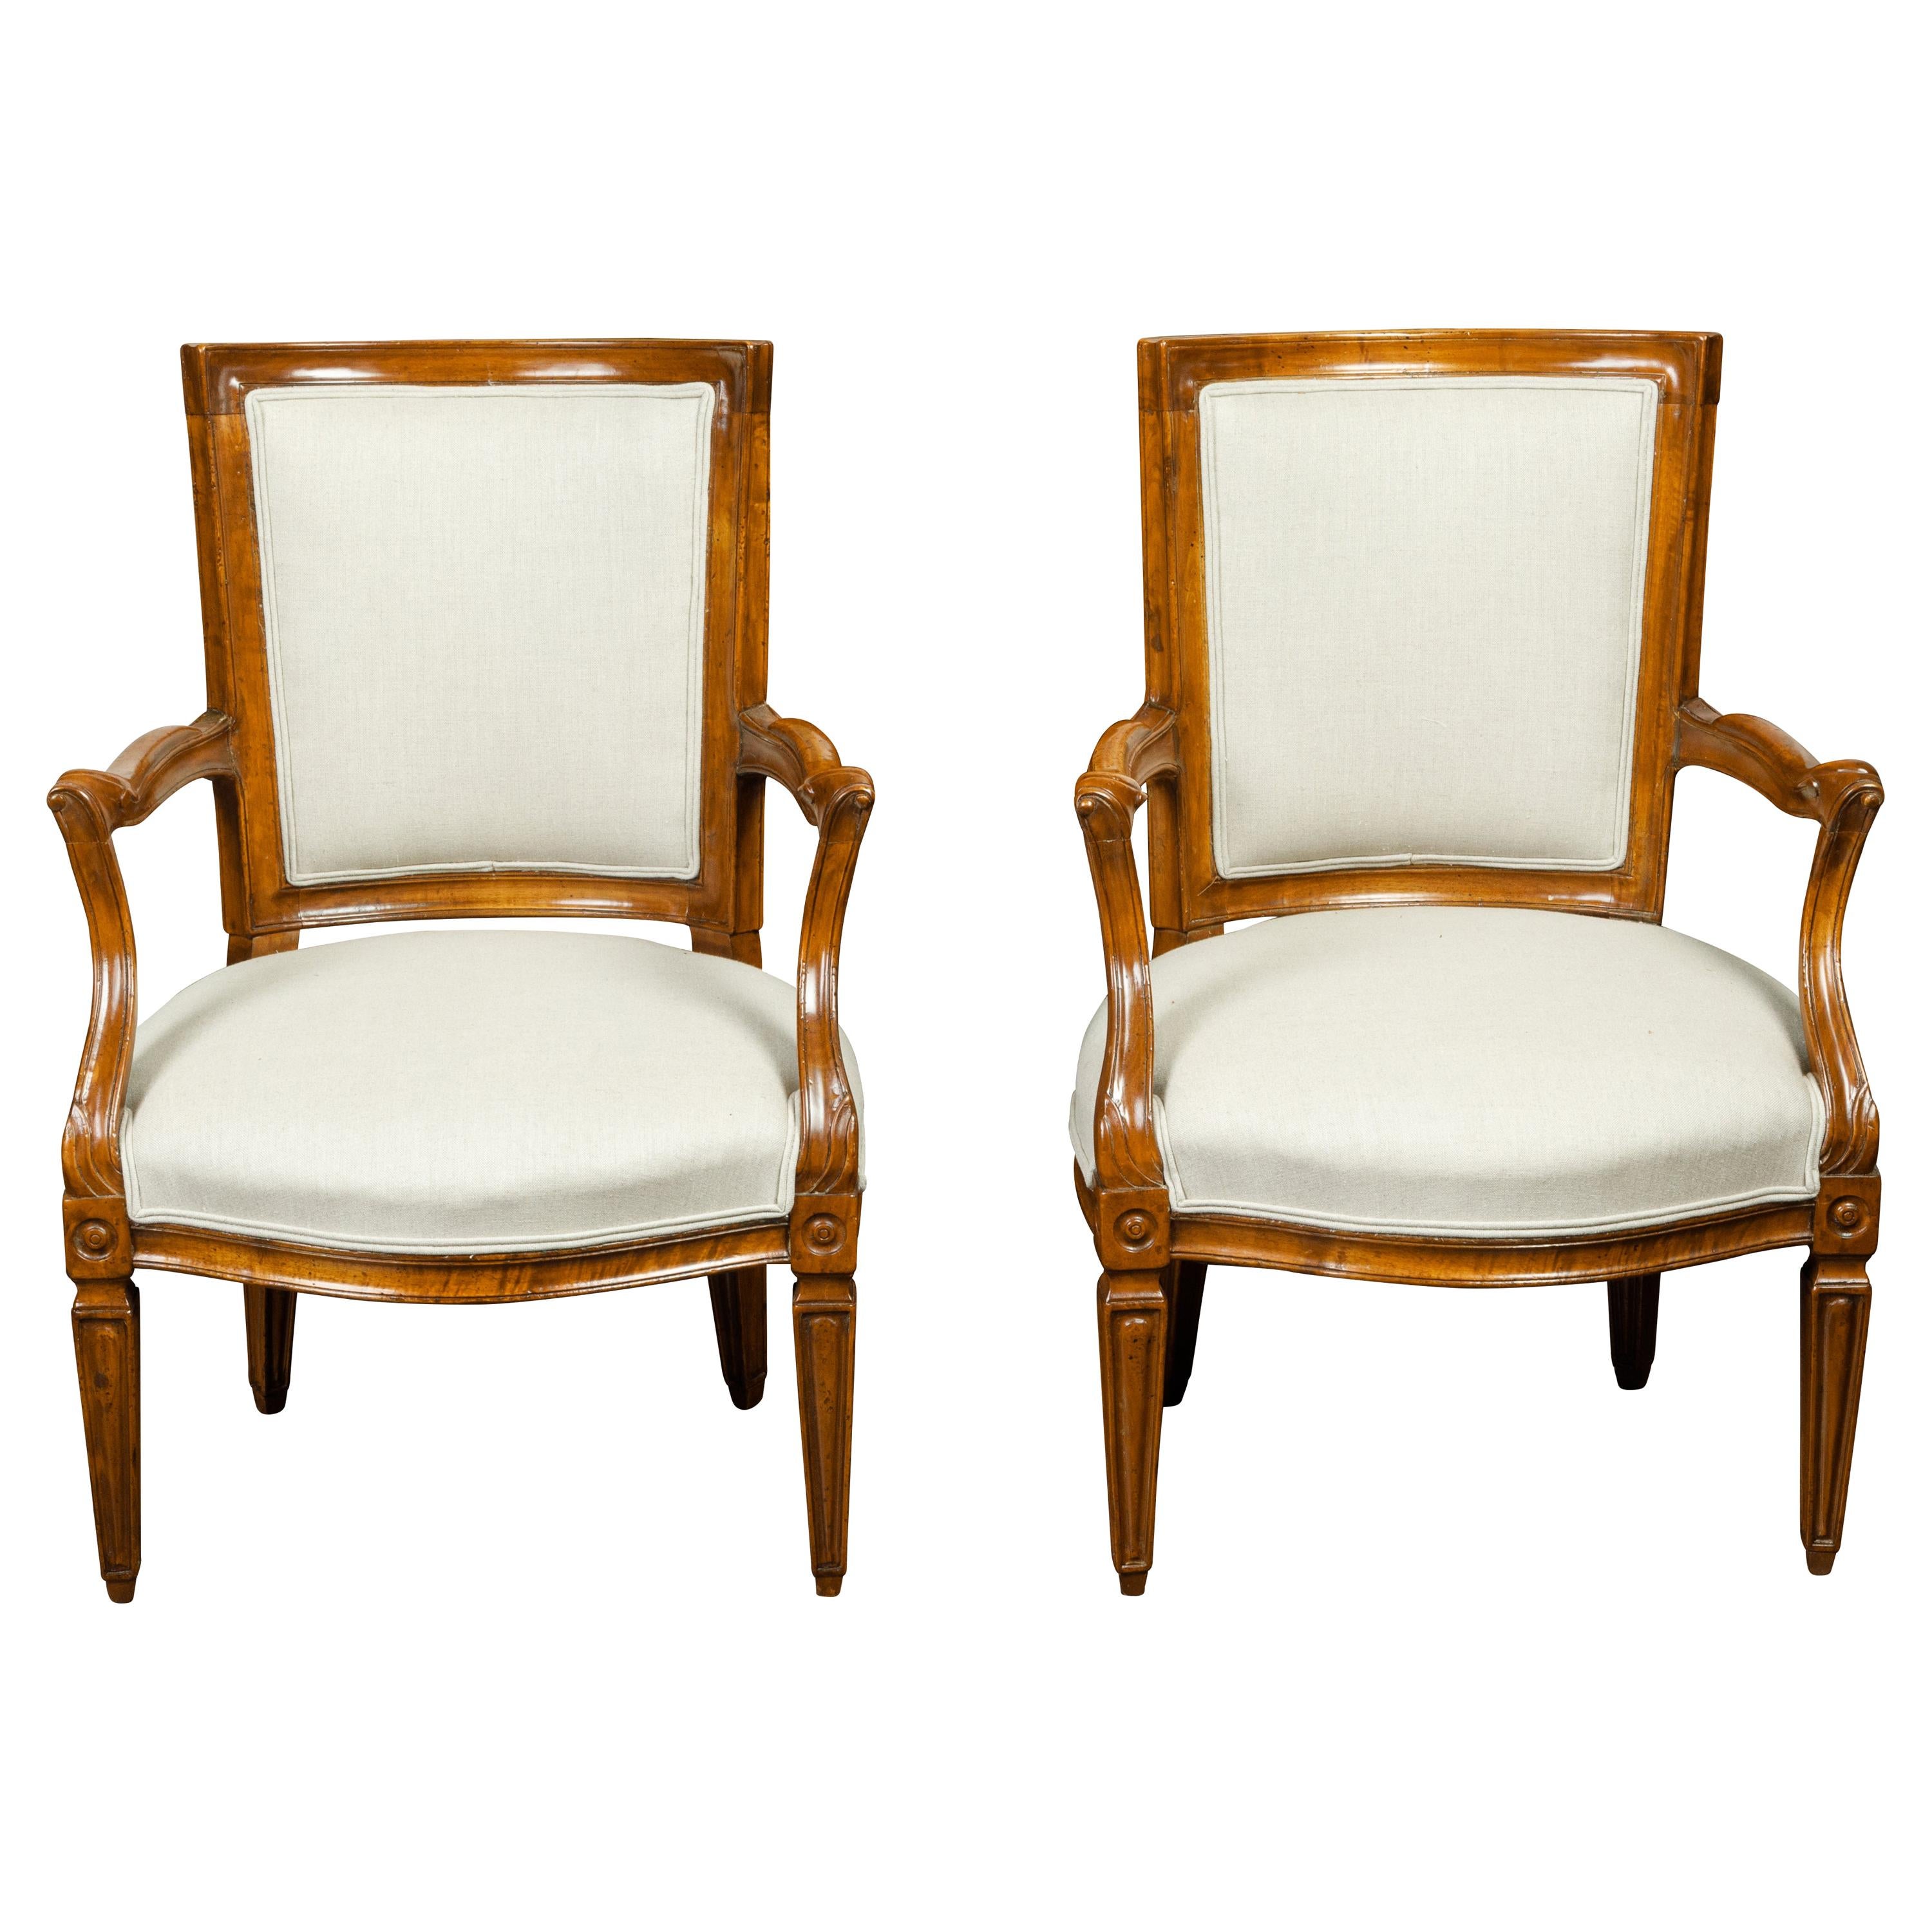 Pair of Italian 1860s Walnut Armchairs with Tapered Legs and New Upholstery